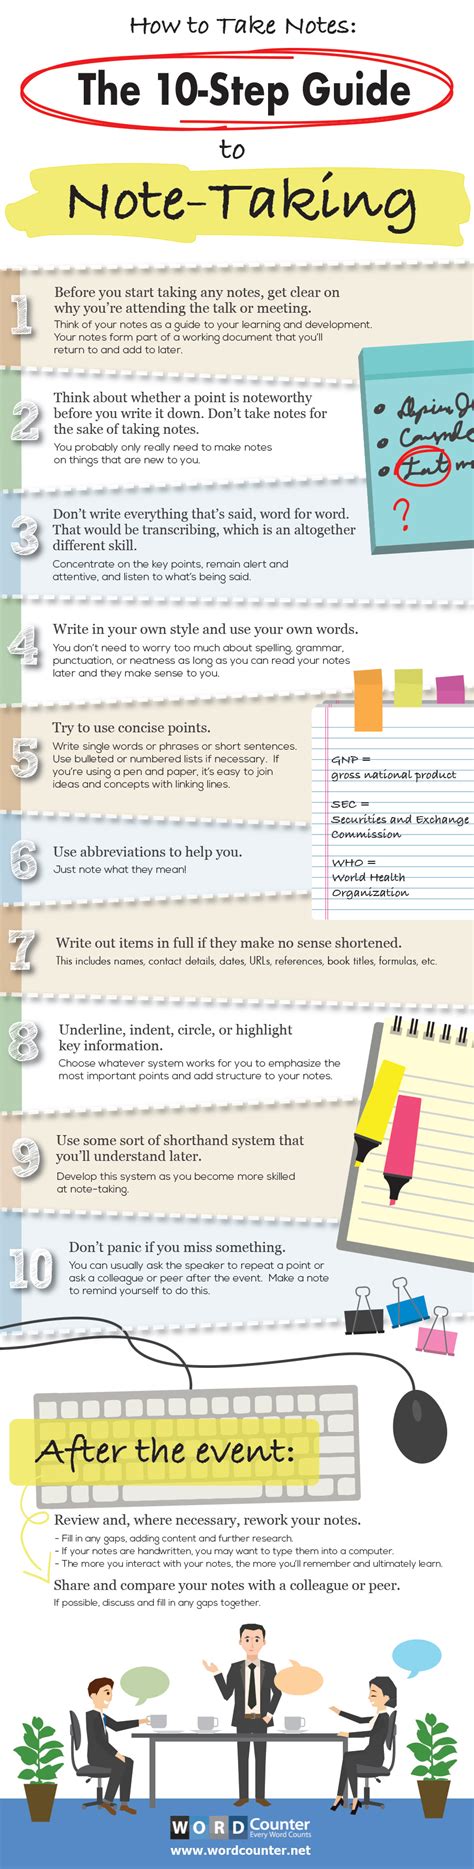 Ics study skills guide to note making. - Chapter 25 section 1 guided reading answers.